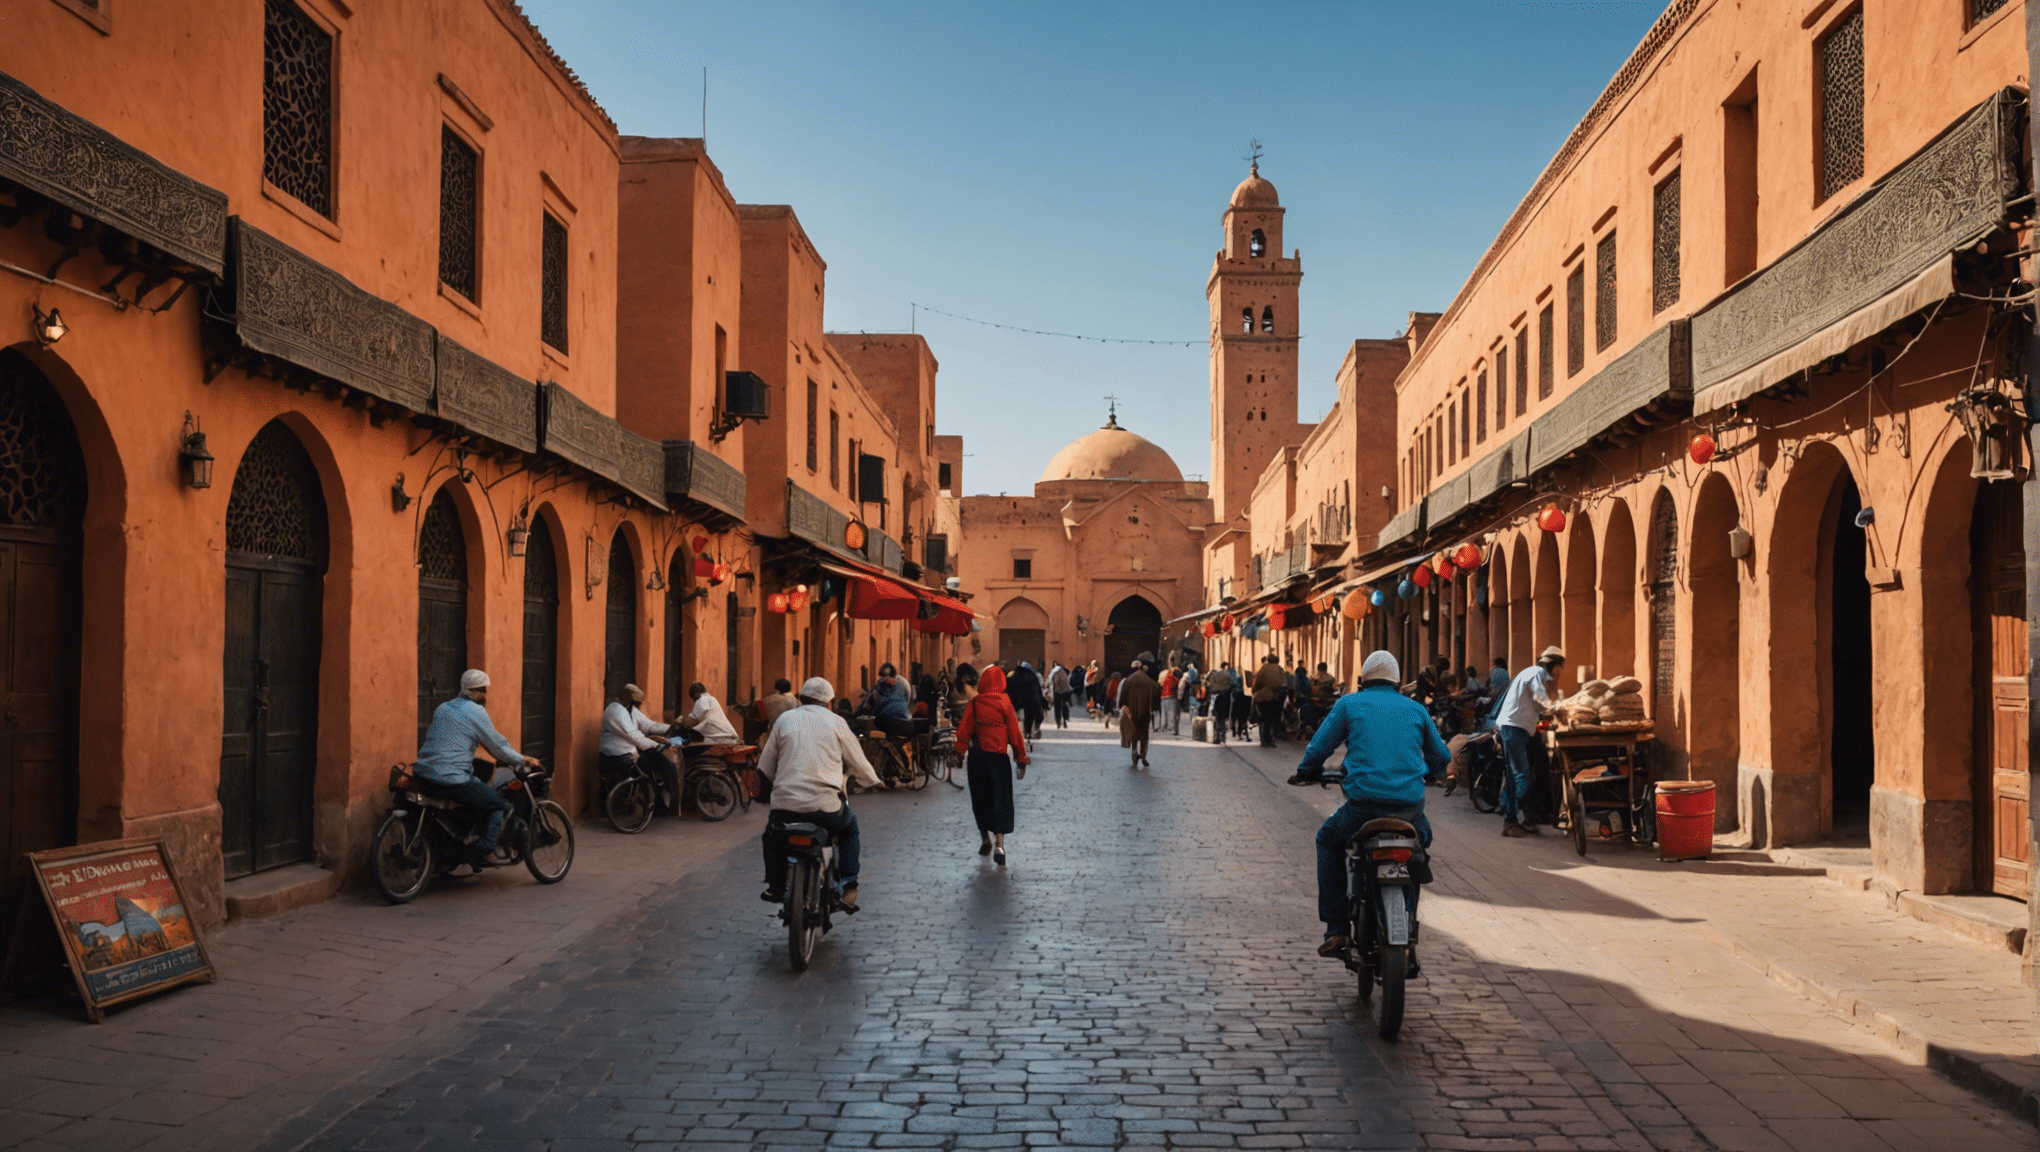 find out if taxi fares in marrakech are expensive and learn how to save on transportation costs during your trip.